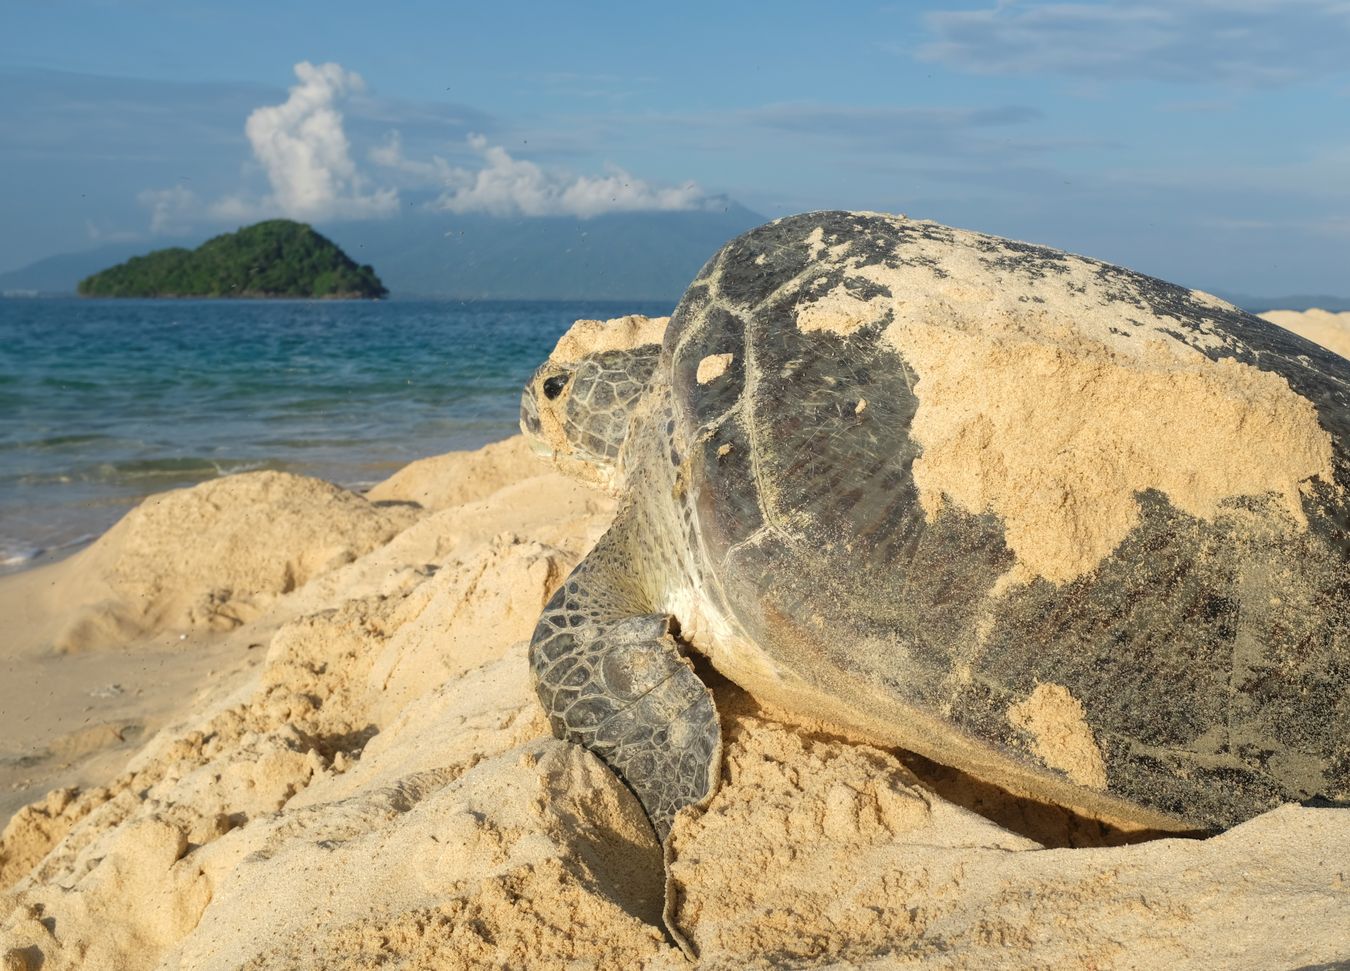 With the sun already high, a green turtle rests for a moment on its way back to the ocean, in the background the small island Talang Kecil.